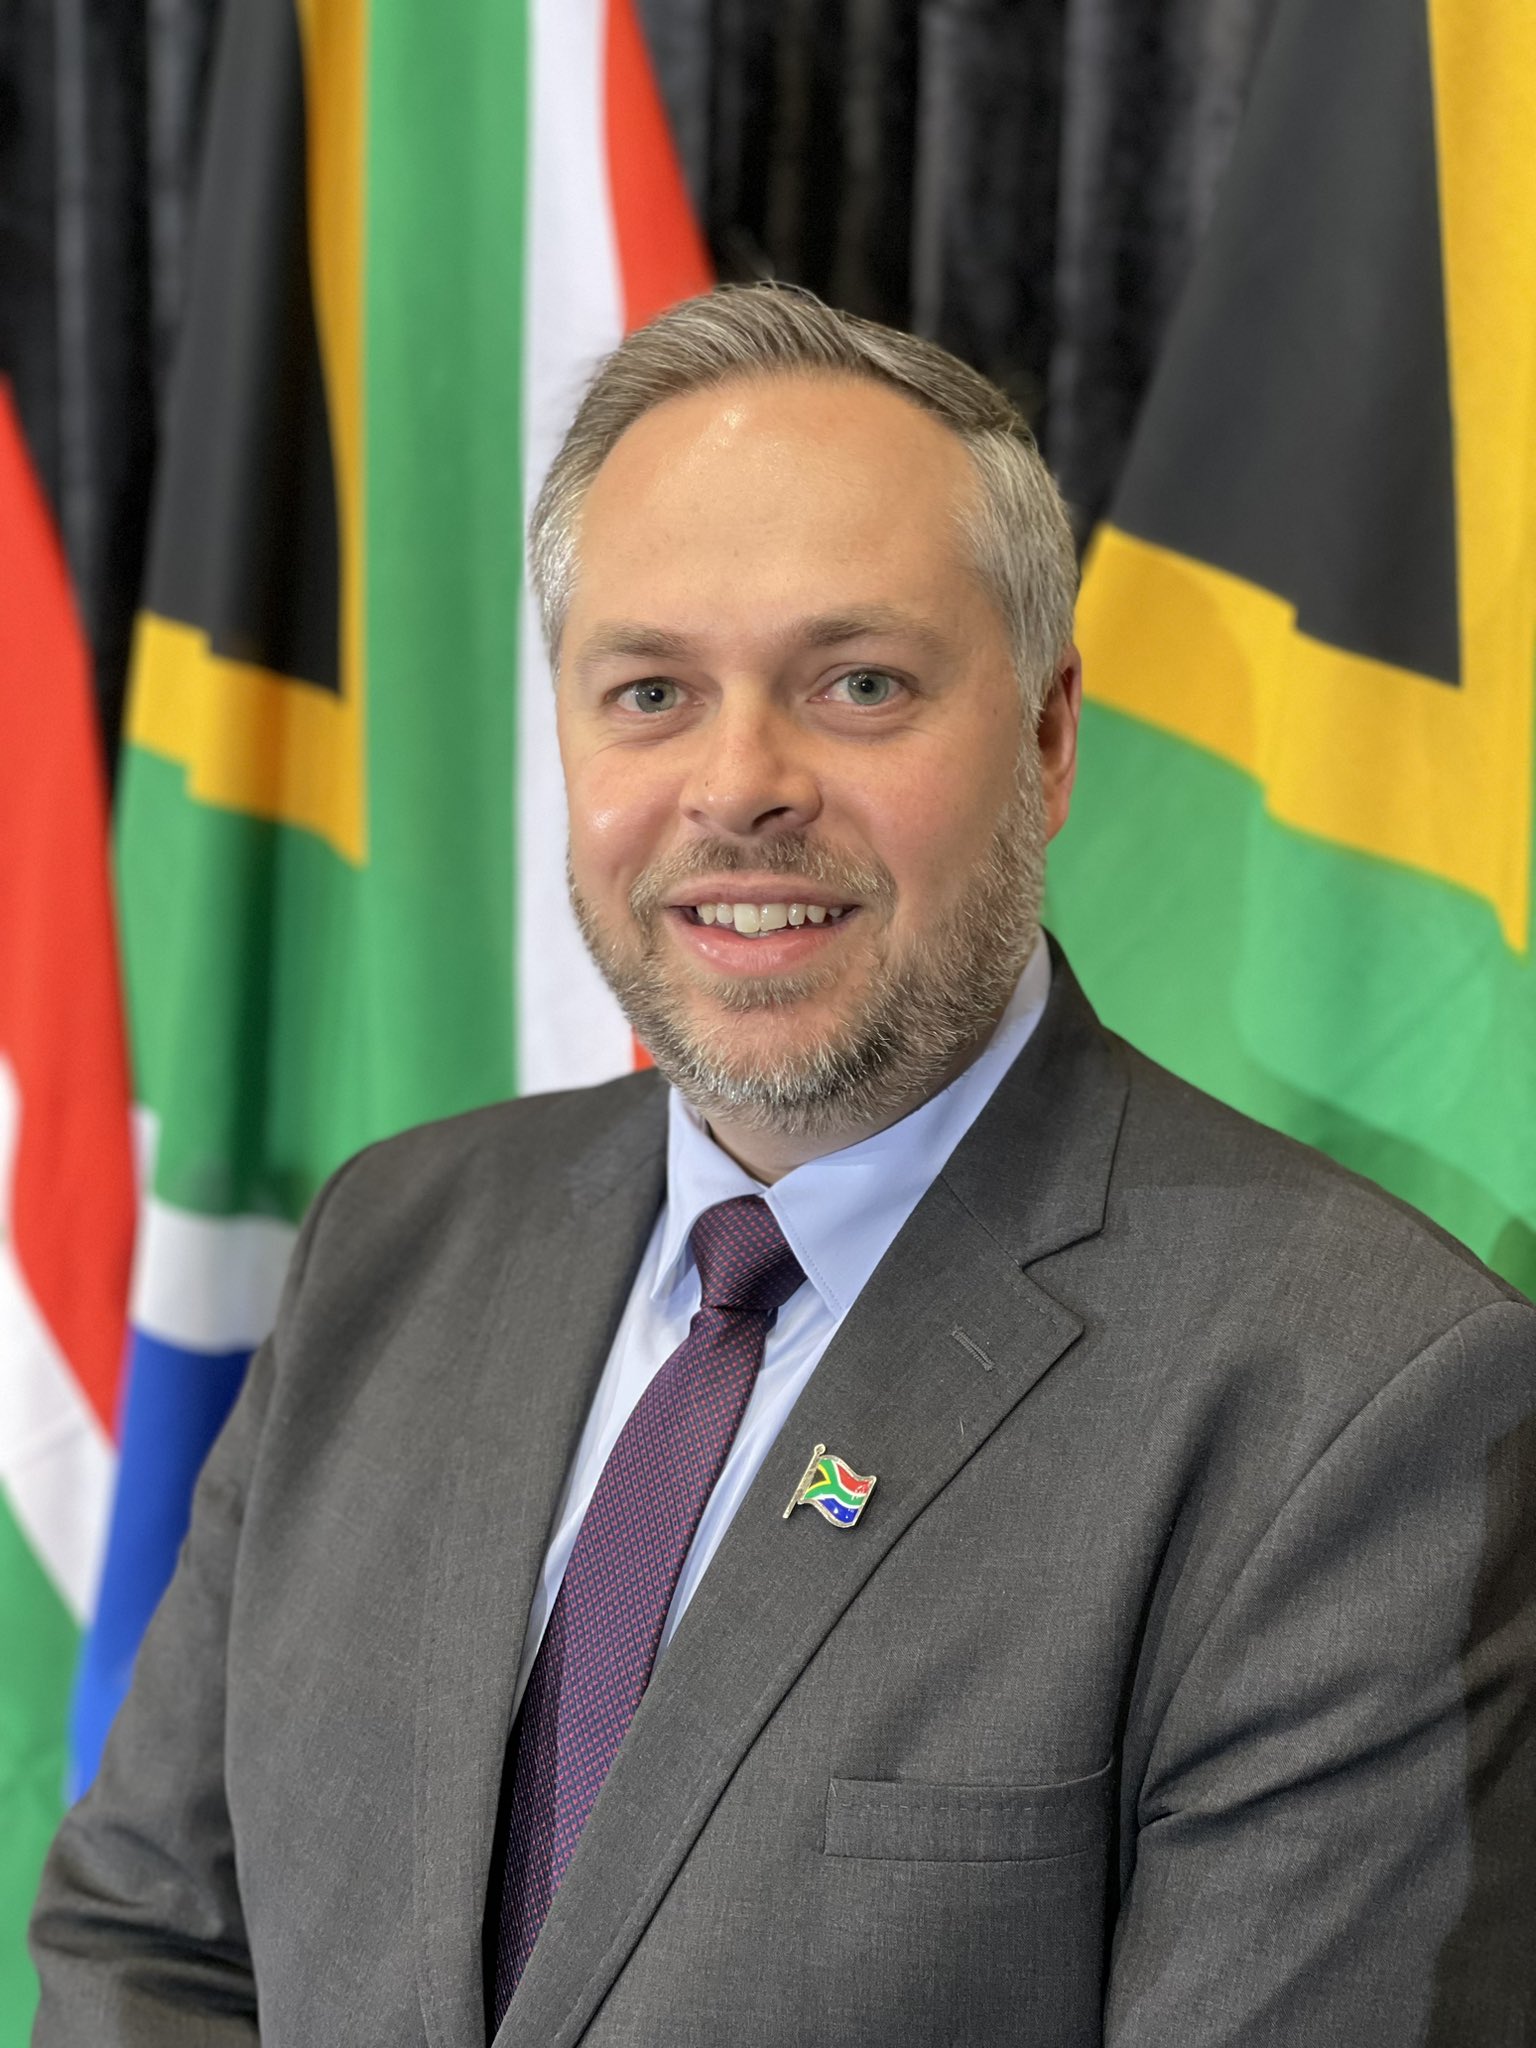 Leon Schreiber is the new Minister of Home Affairs.